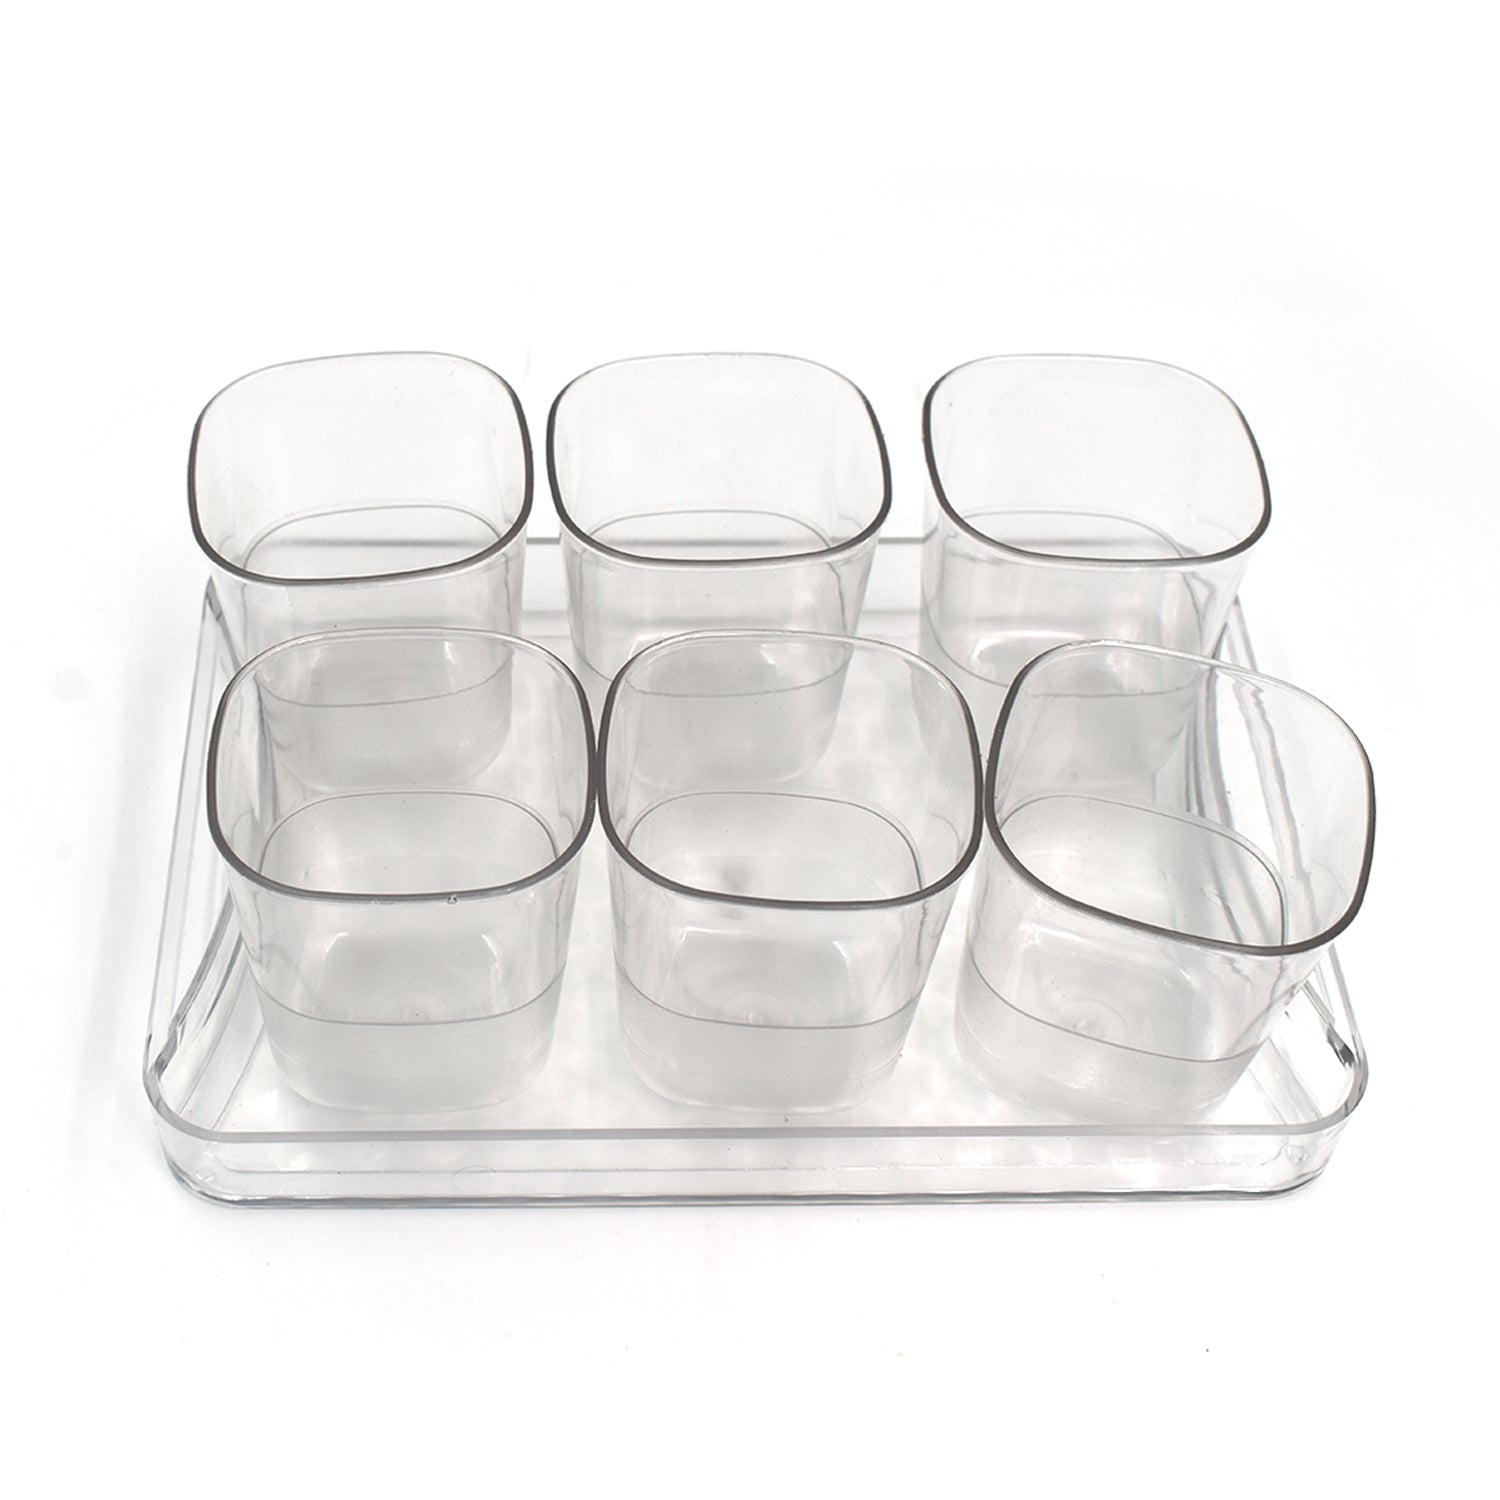 2832 6pc Glasses Set With tray Stylish Transparent Water Glass/Juice Glass/Beer Glass/Wine Glass Plastic Glass Set DeoDap